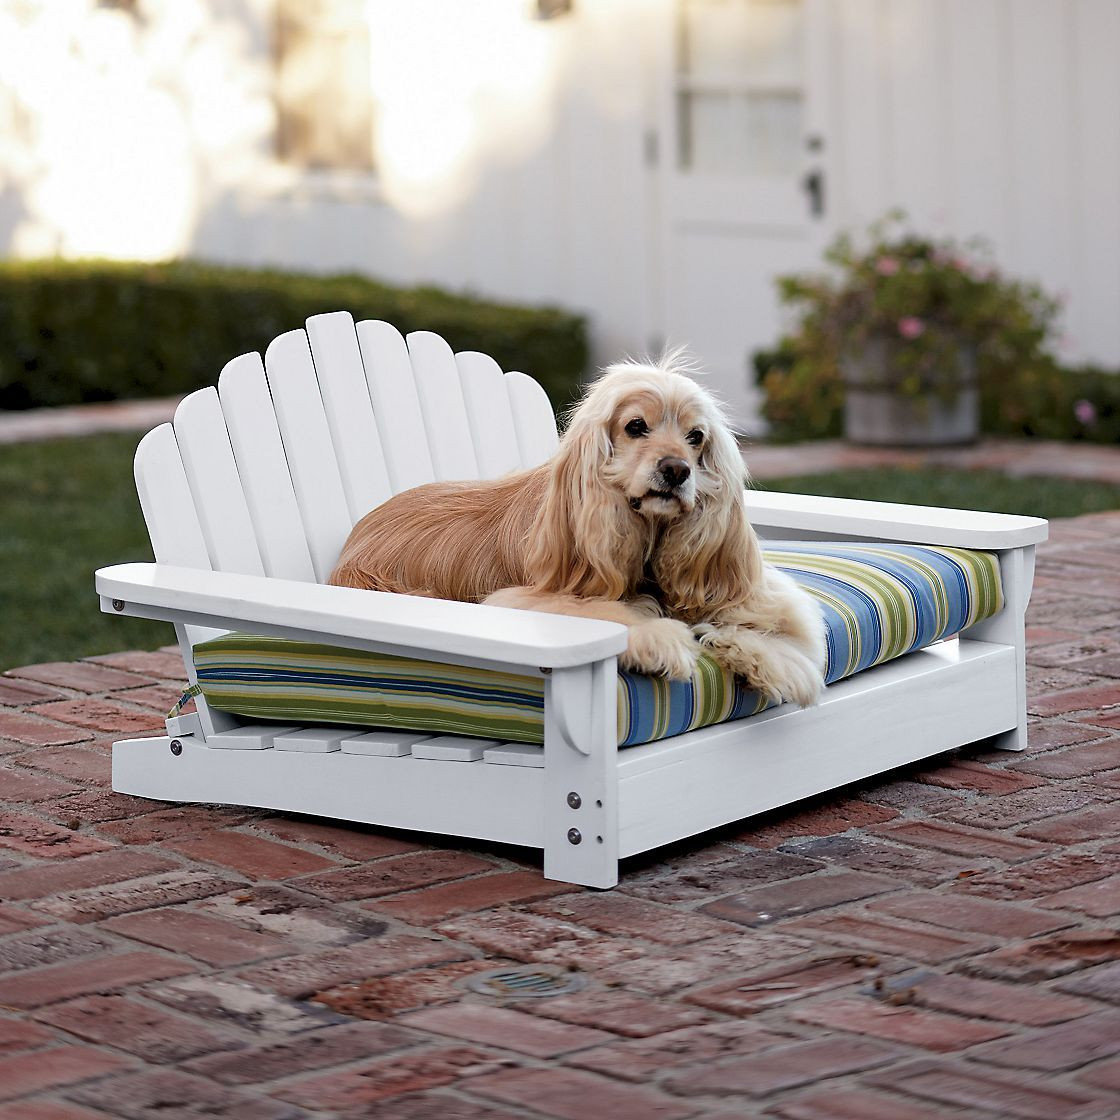 DIY Outdoor Dog Bed
 Adirondack Pet Bed have I mentioned my obsession w all